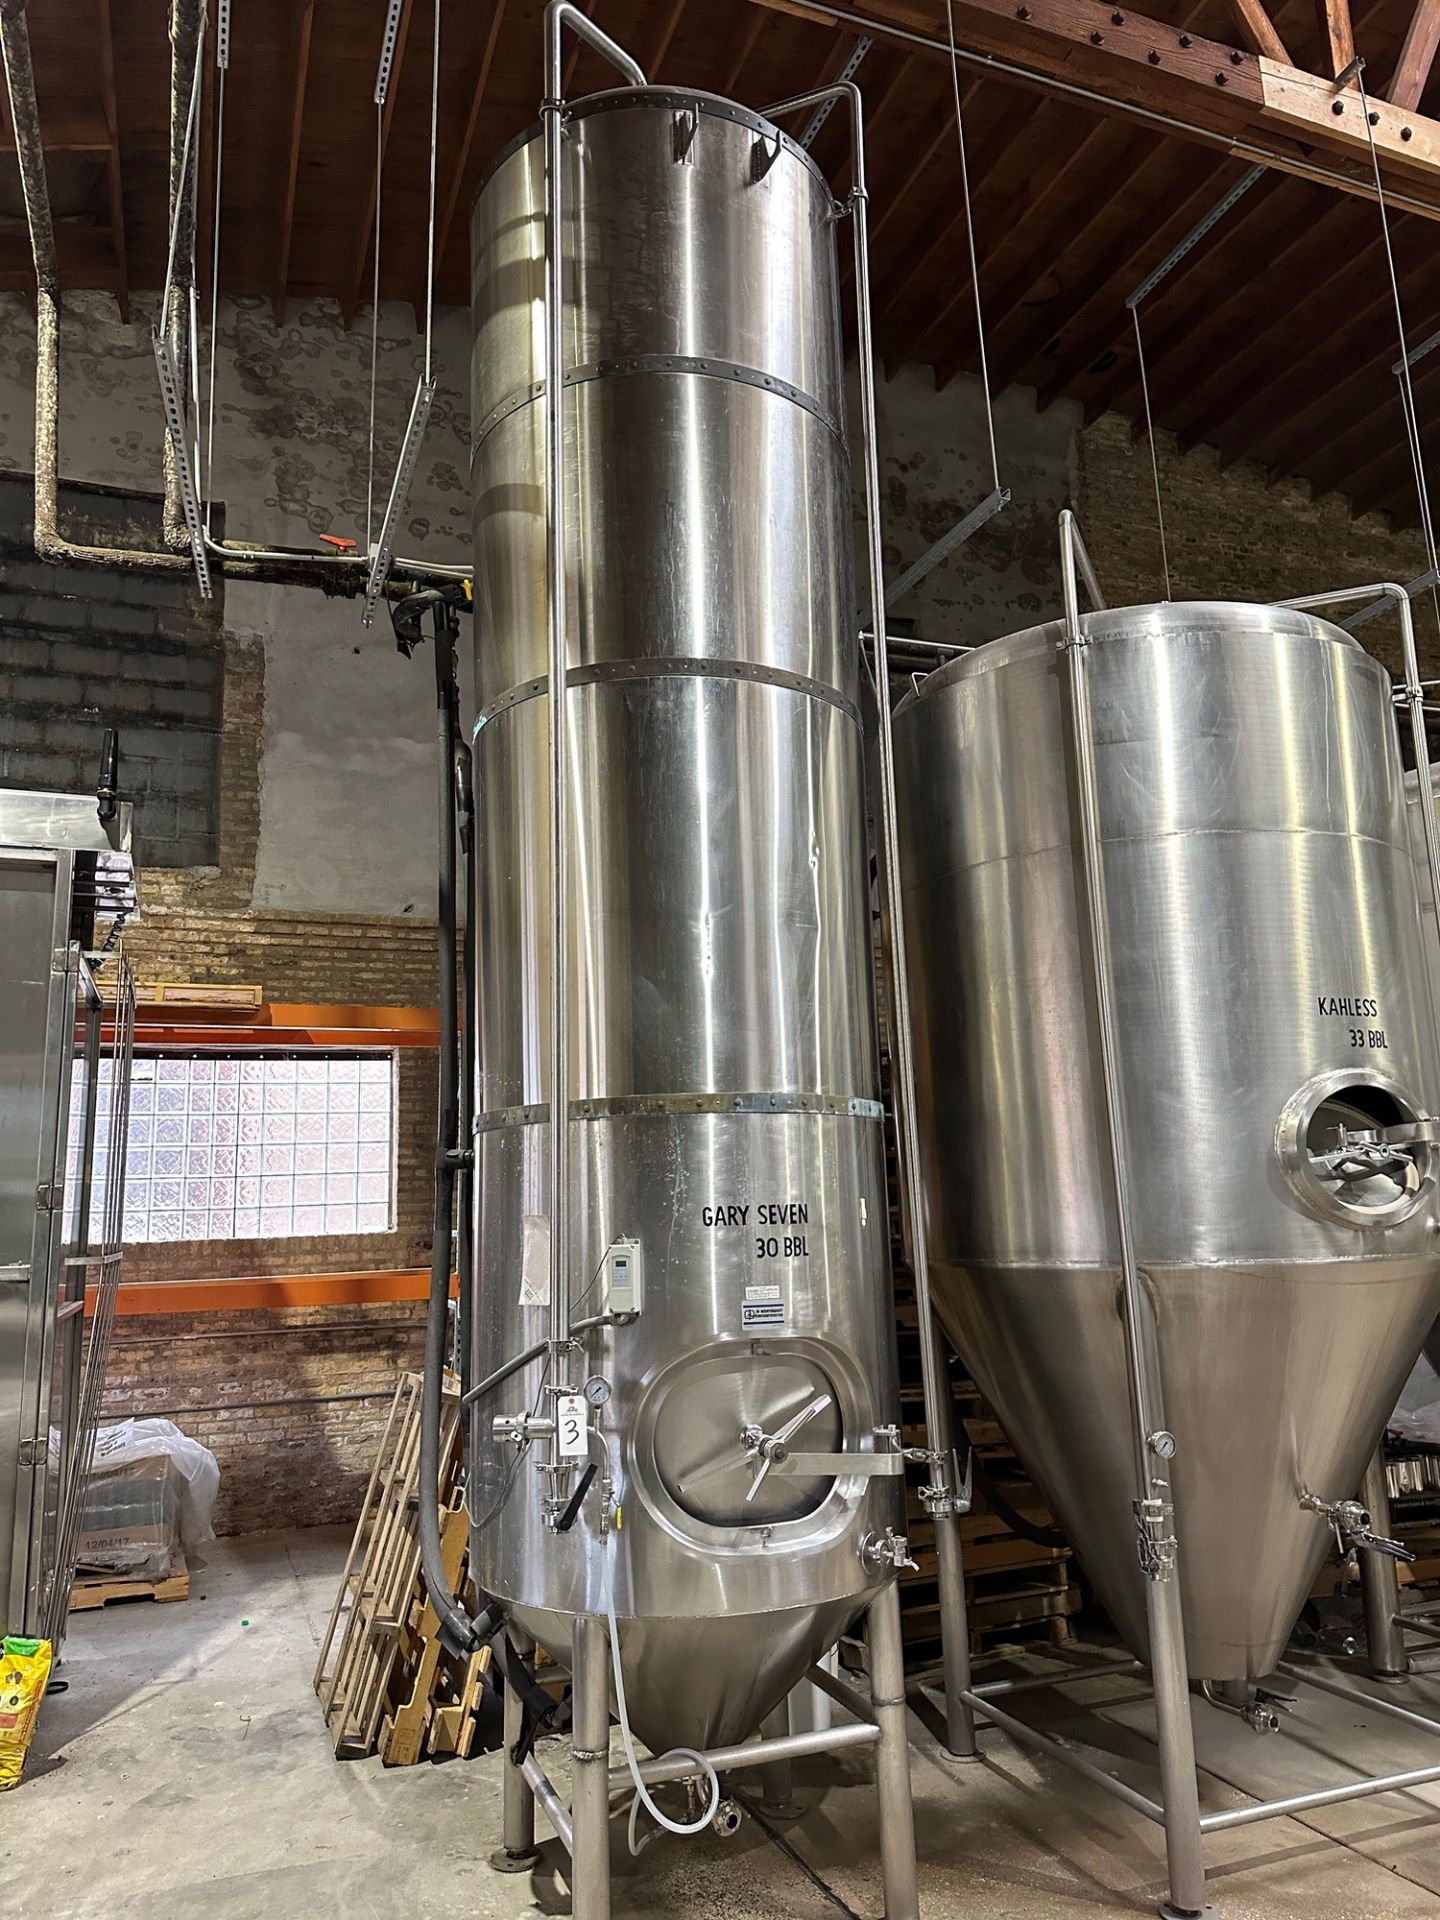 JVNW 30 BBL Stainless Steel Narrow Lager Fermentation Tank - Cone Bottom Glycol Jac | Rig Fee $1250